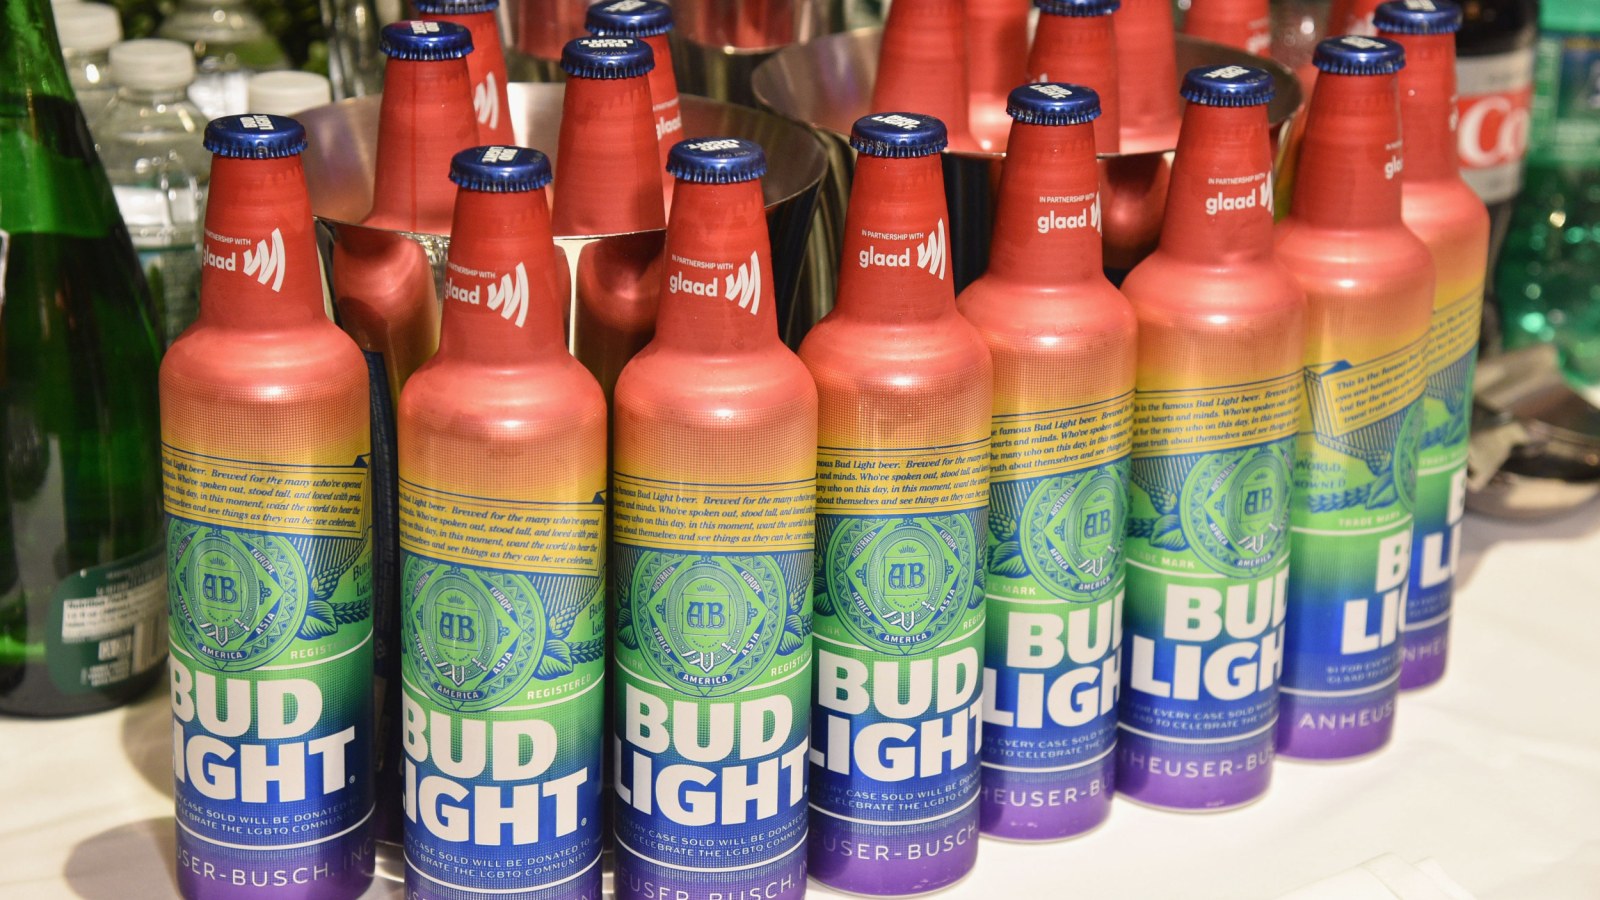 Why a Bud Light Boycott in the Won't Matter